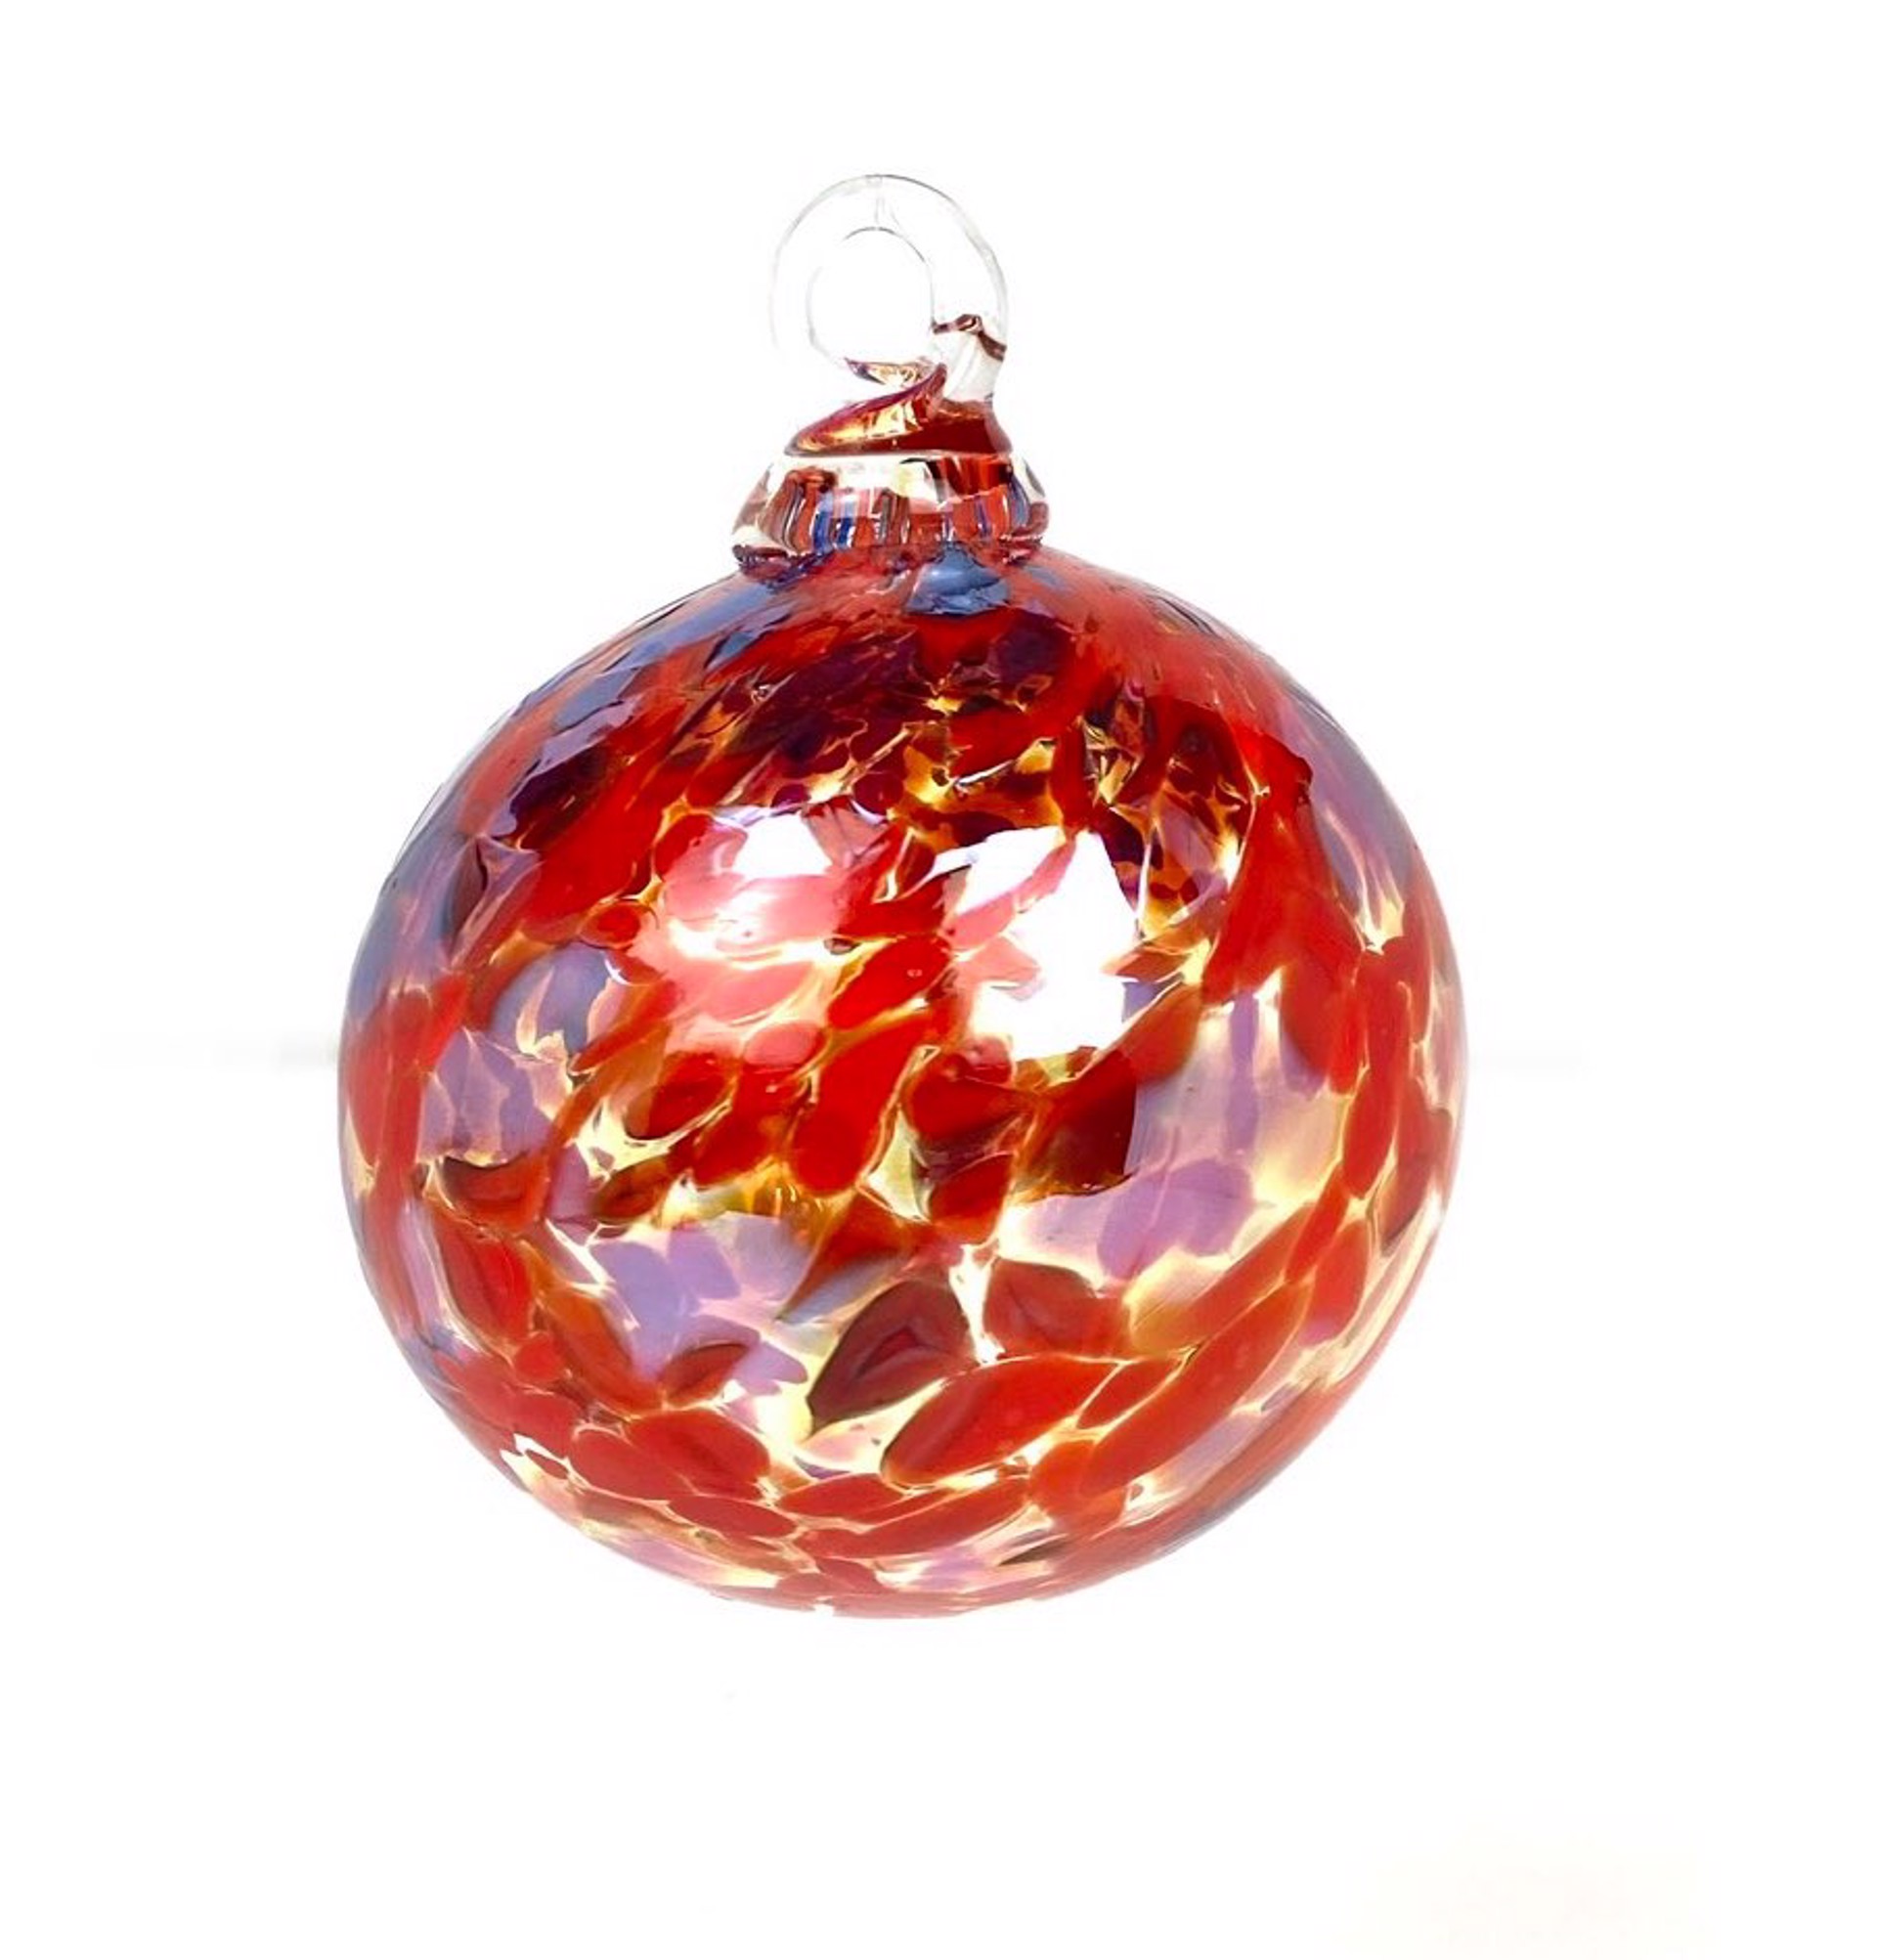 Dapple Red and Silver-Gold  Ornament by Furnace Glass